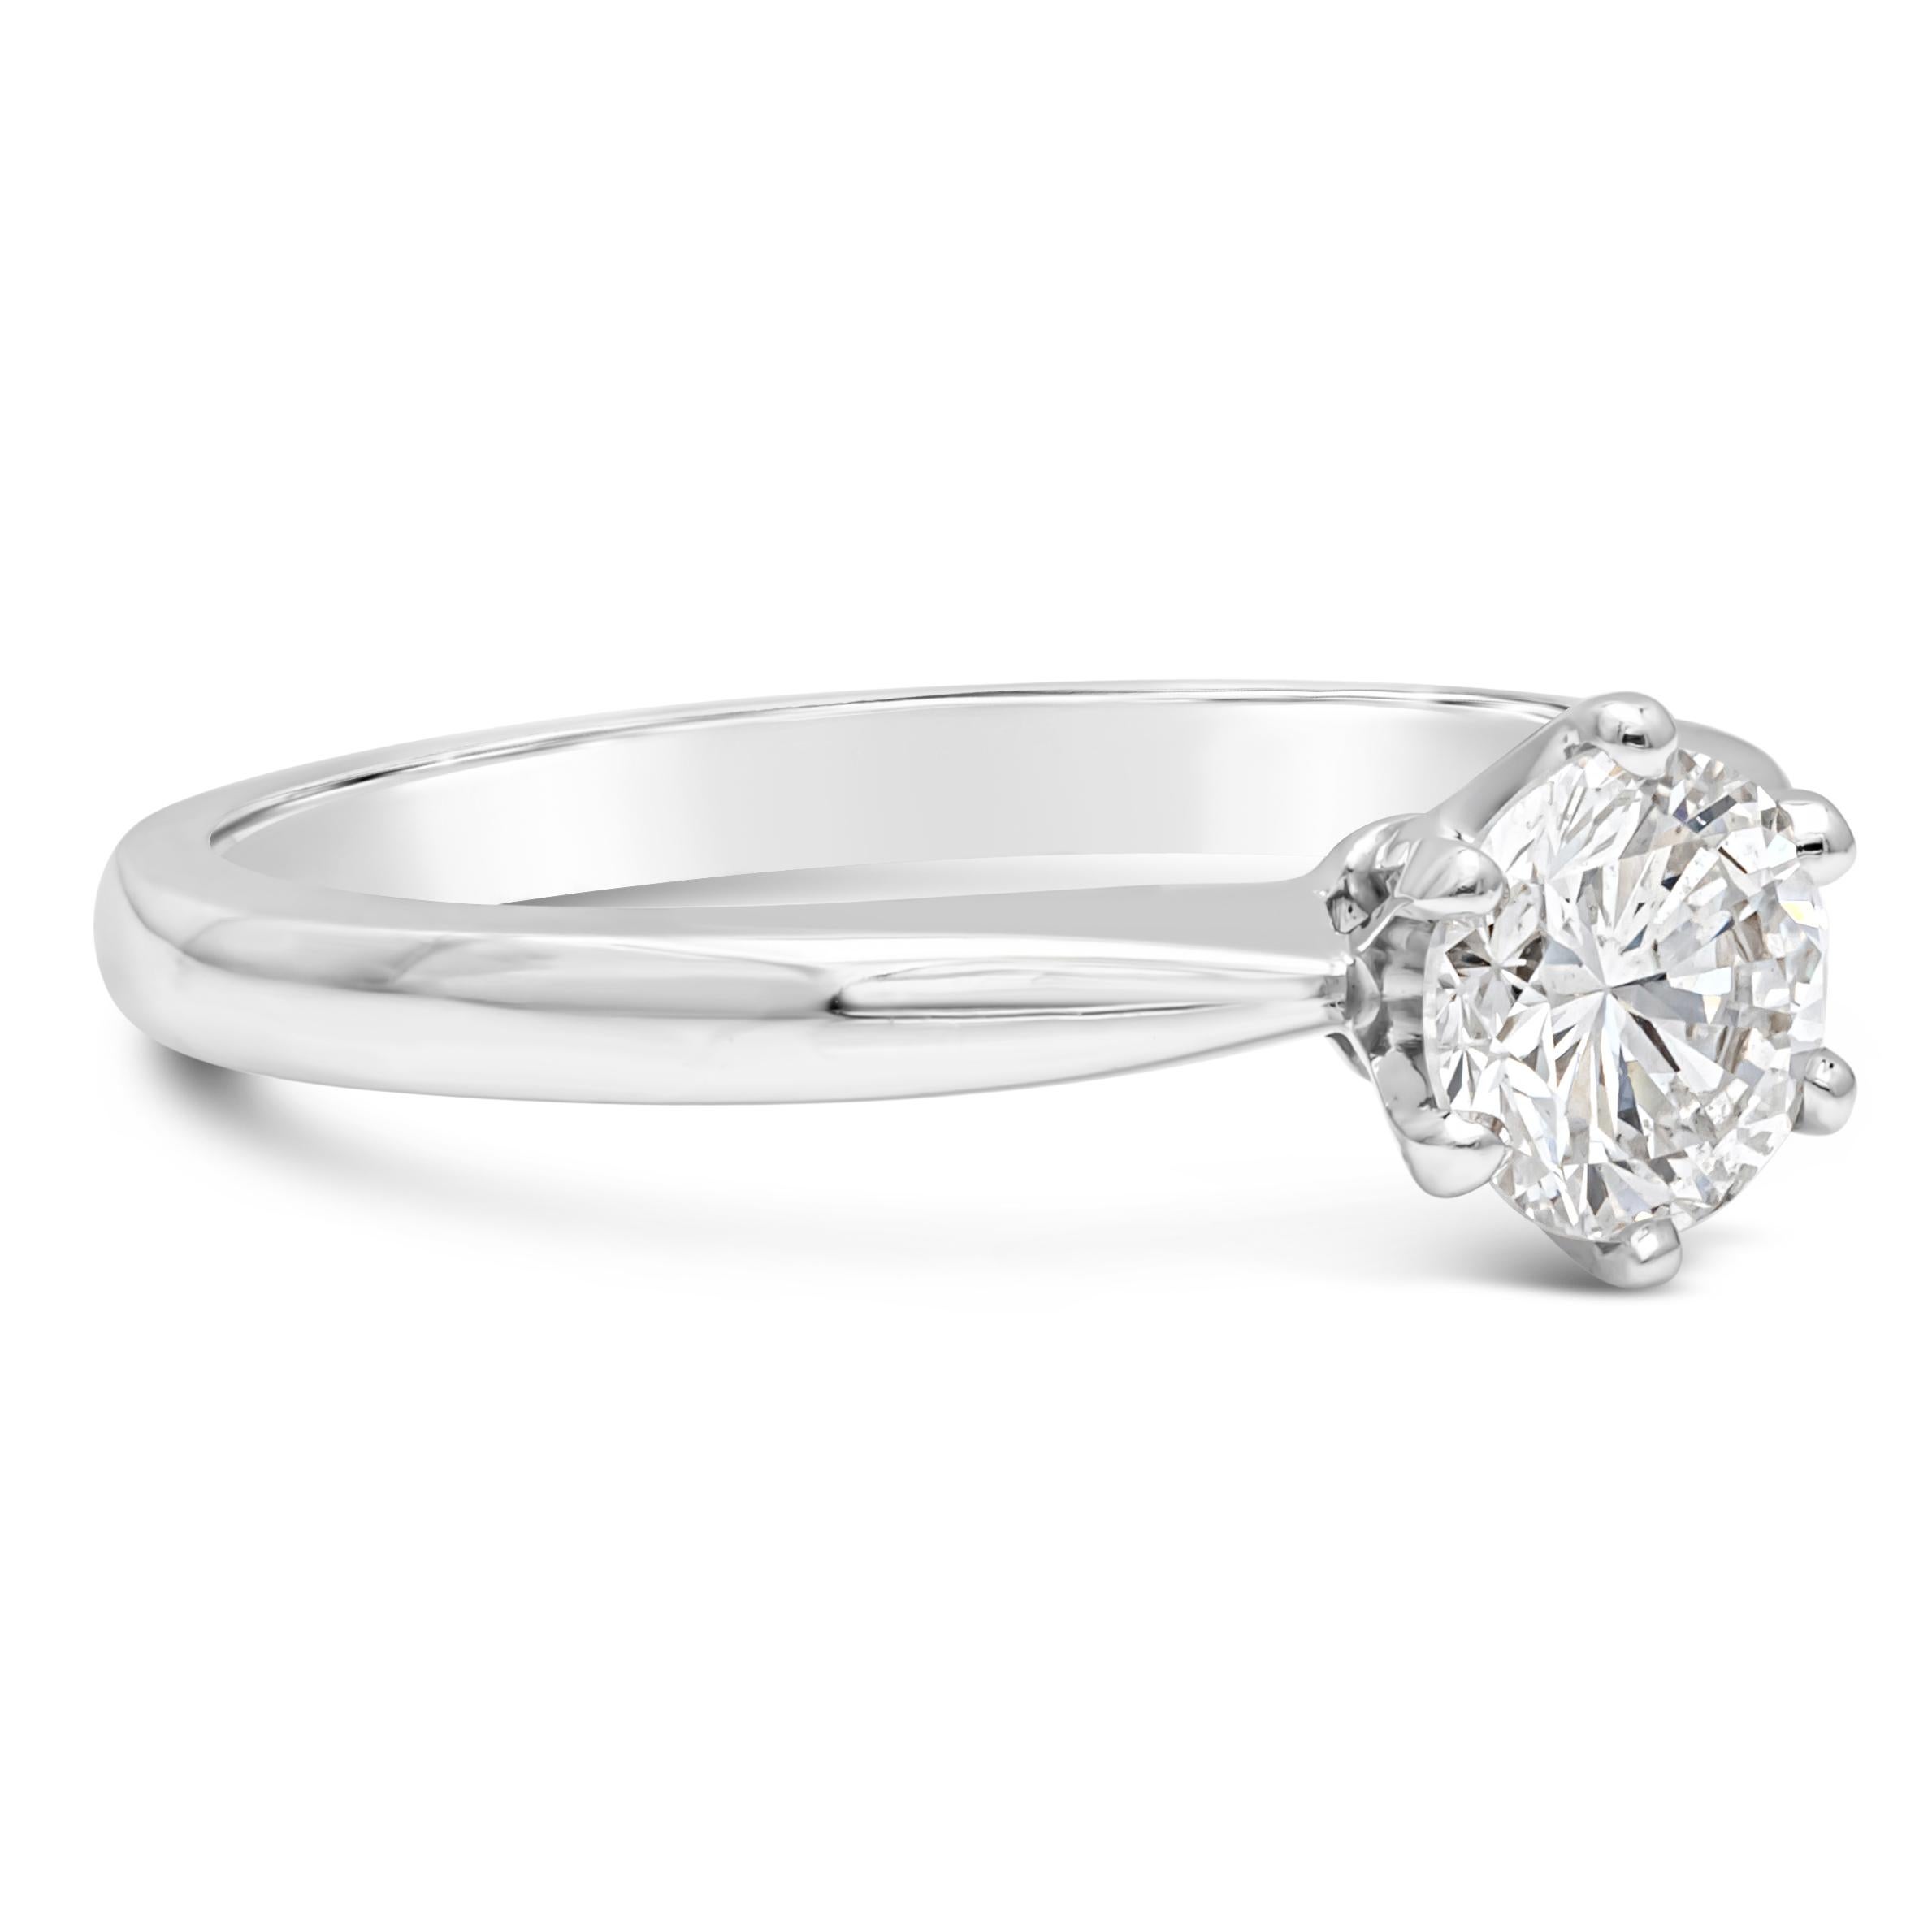 Contemporary Roman Malakov 0.70 Carat Total Brilliant Round Diamond Solitaire Engagement Ring For Sale